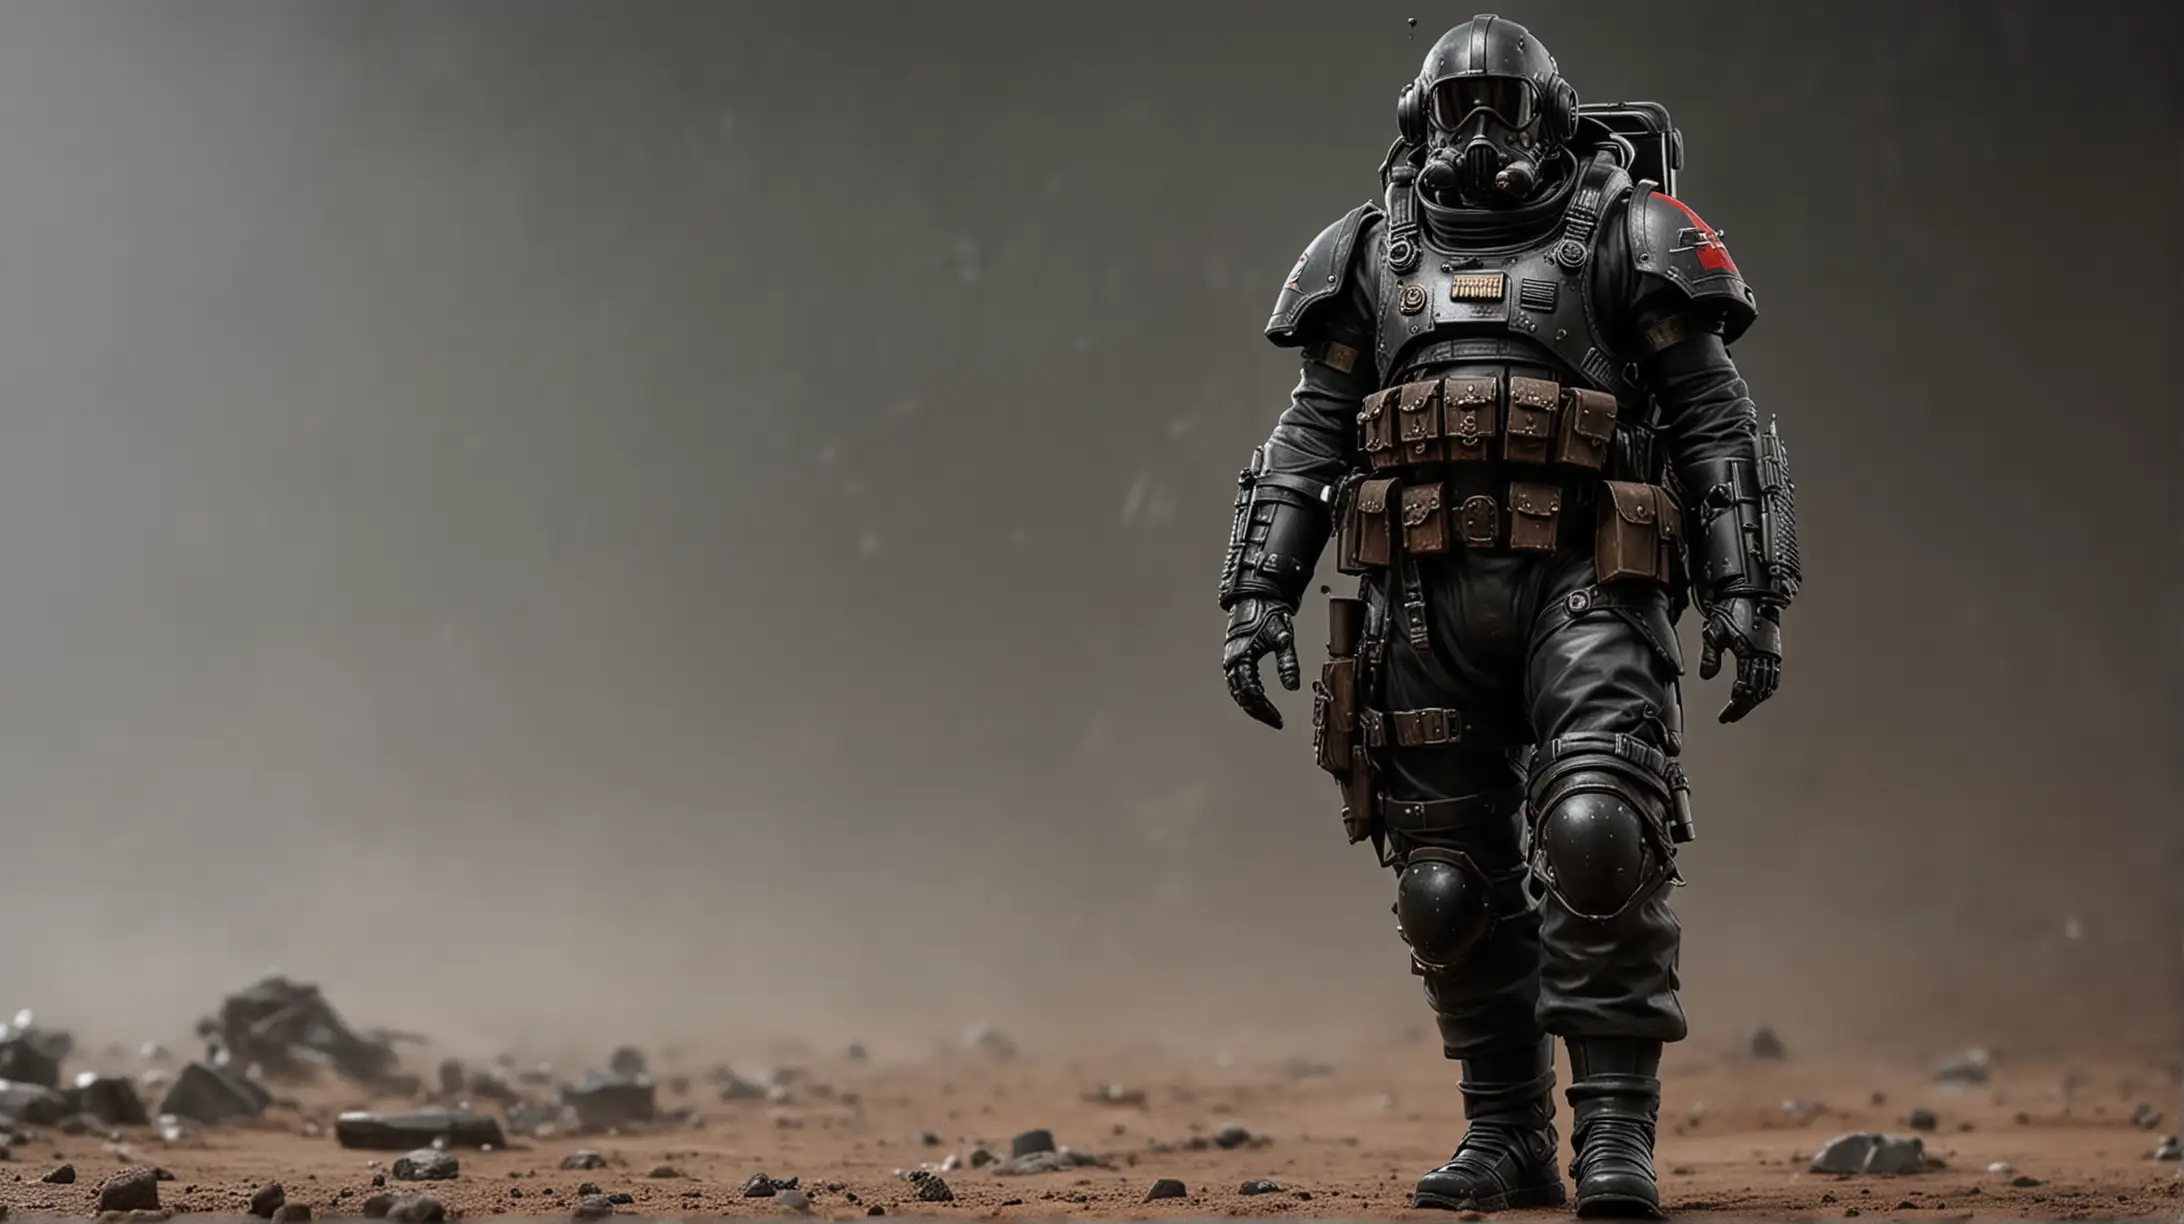 Imperial Guard Soldier in Closed Environment Suit with Air Tank Backpack